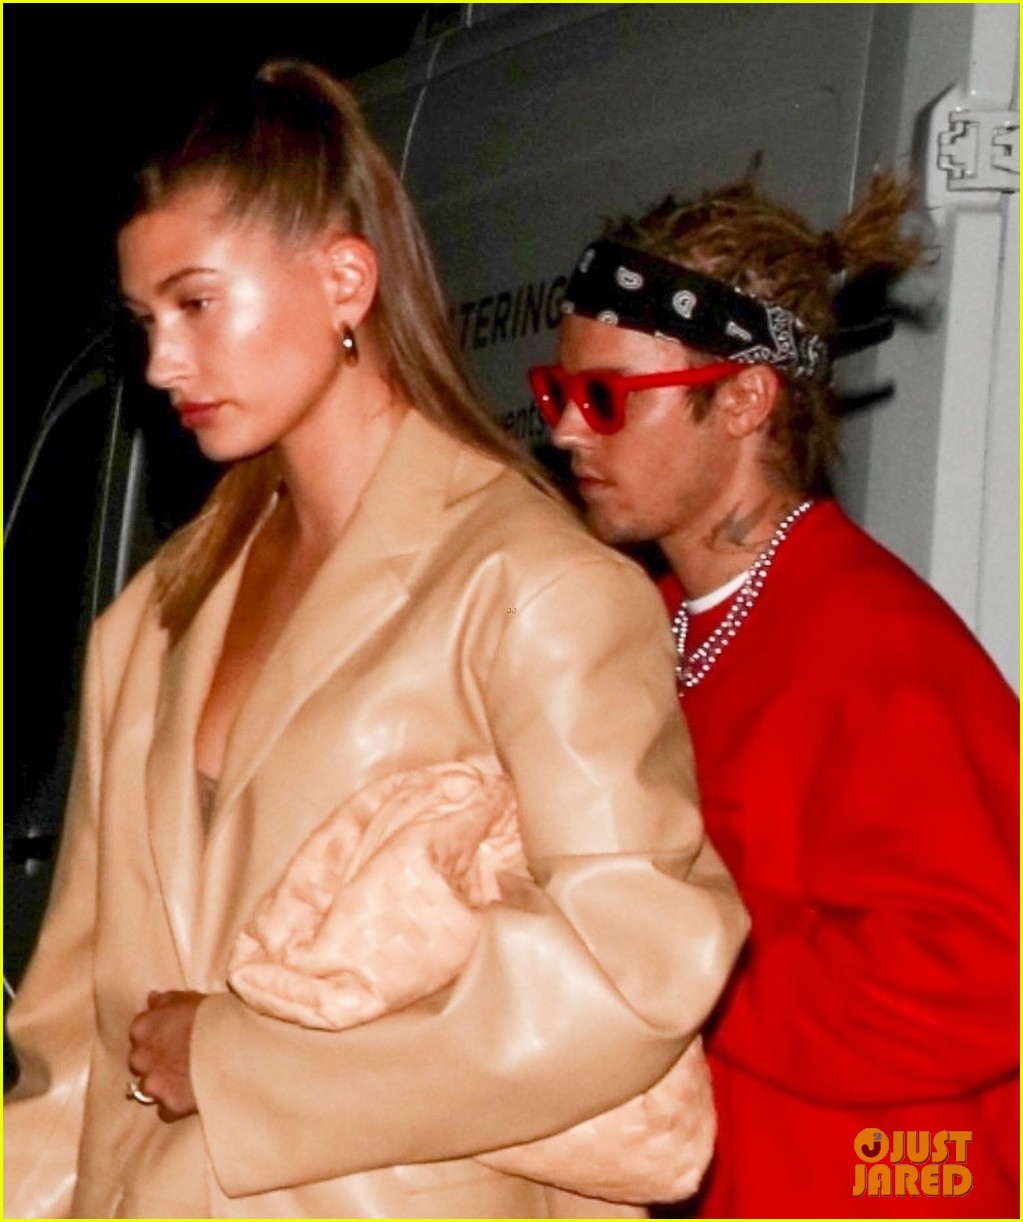 justin bieber new hairstyle at dinner with hailey bieber 04